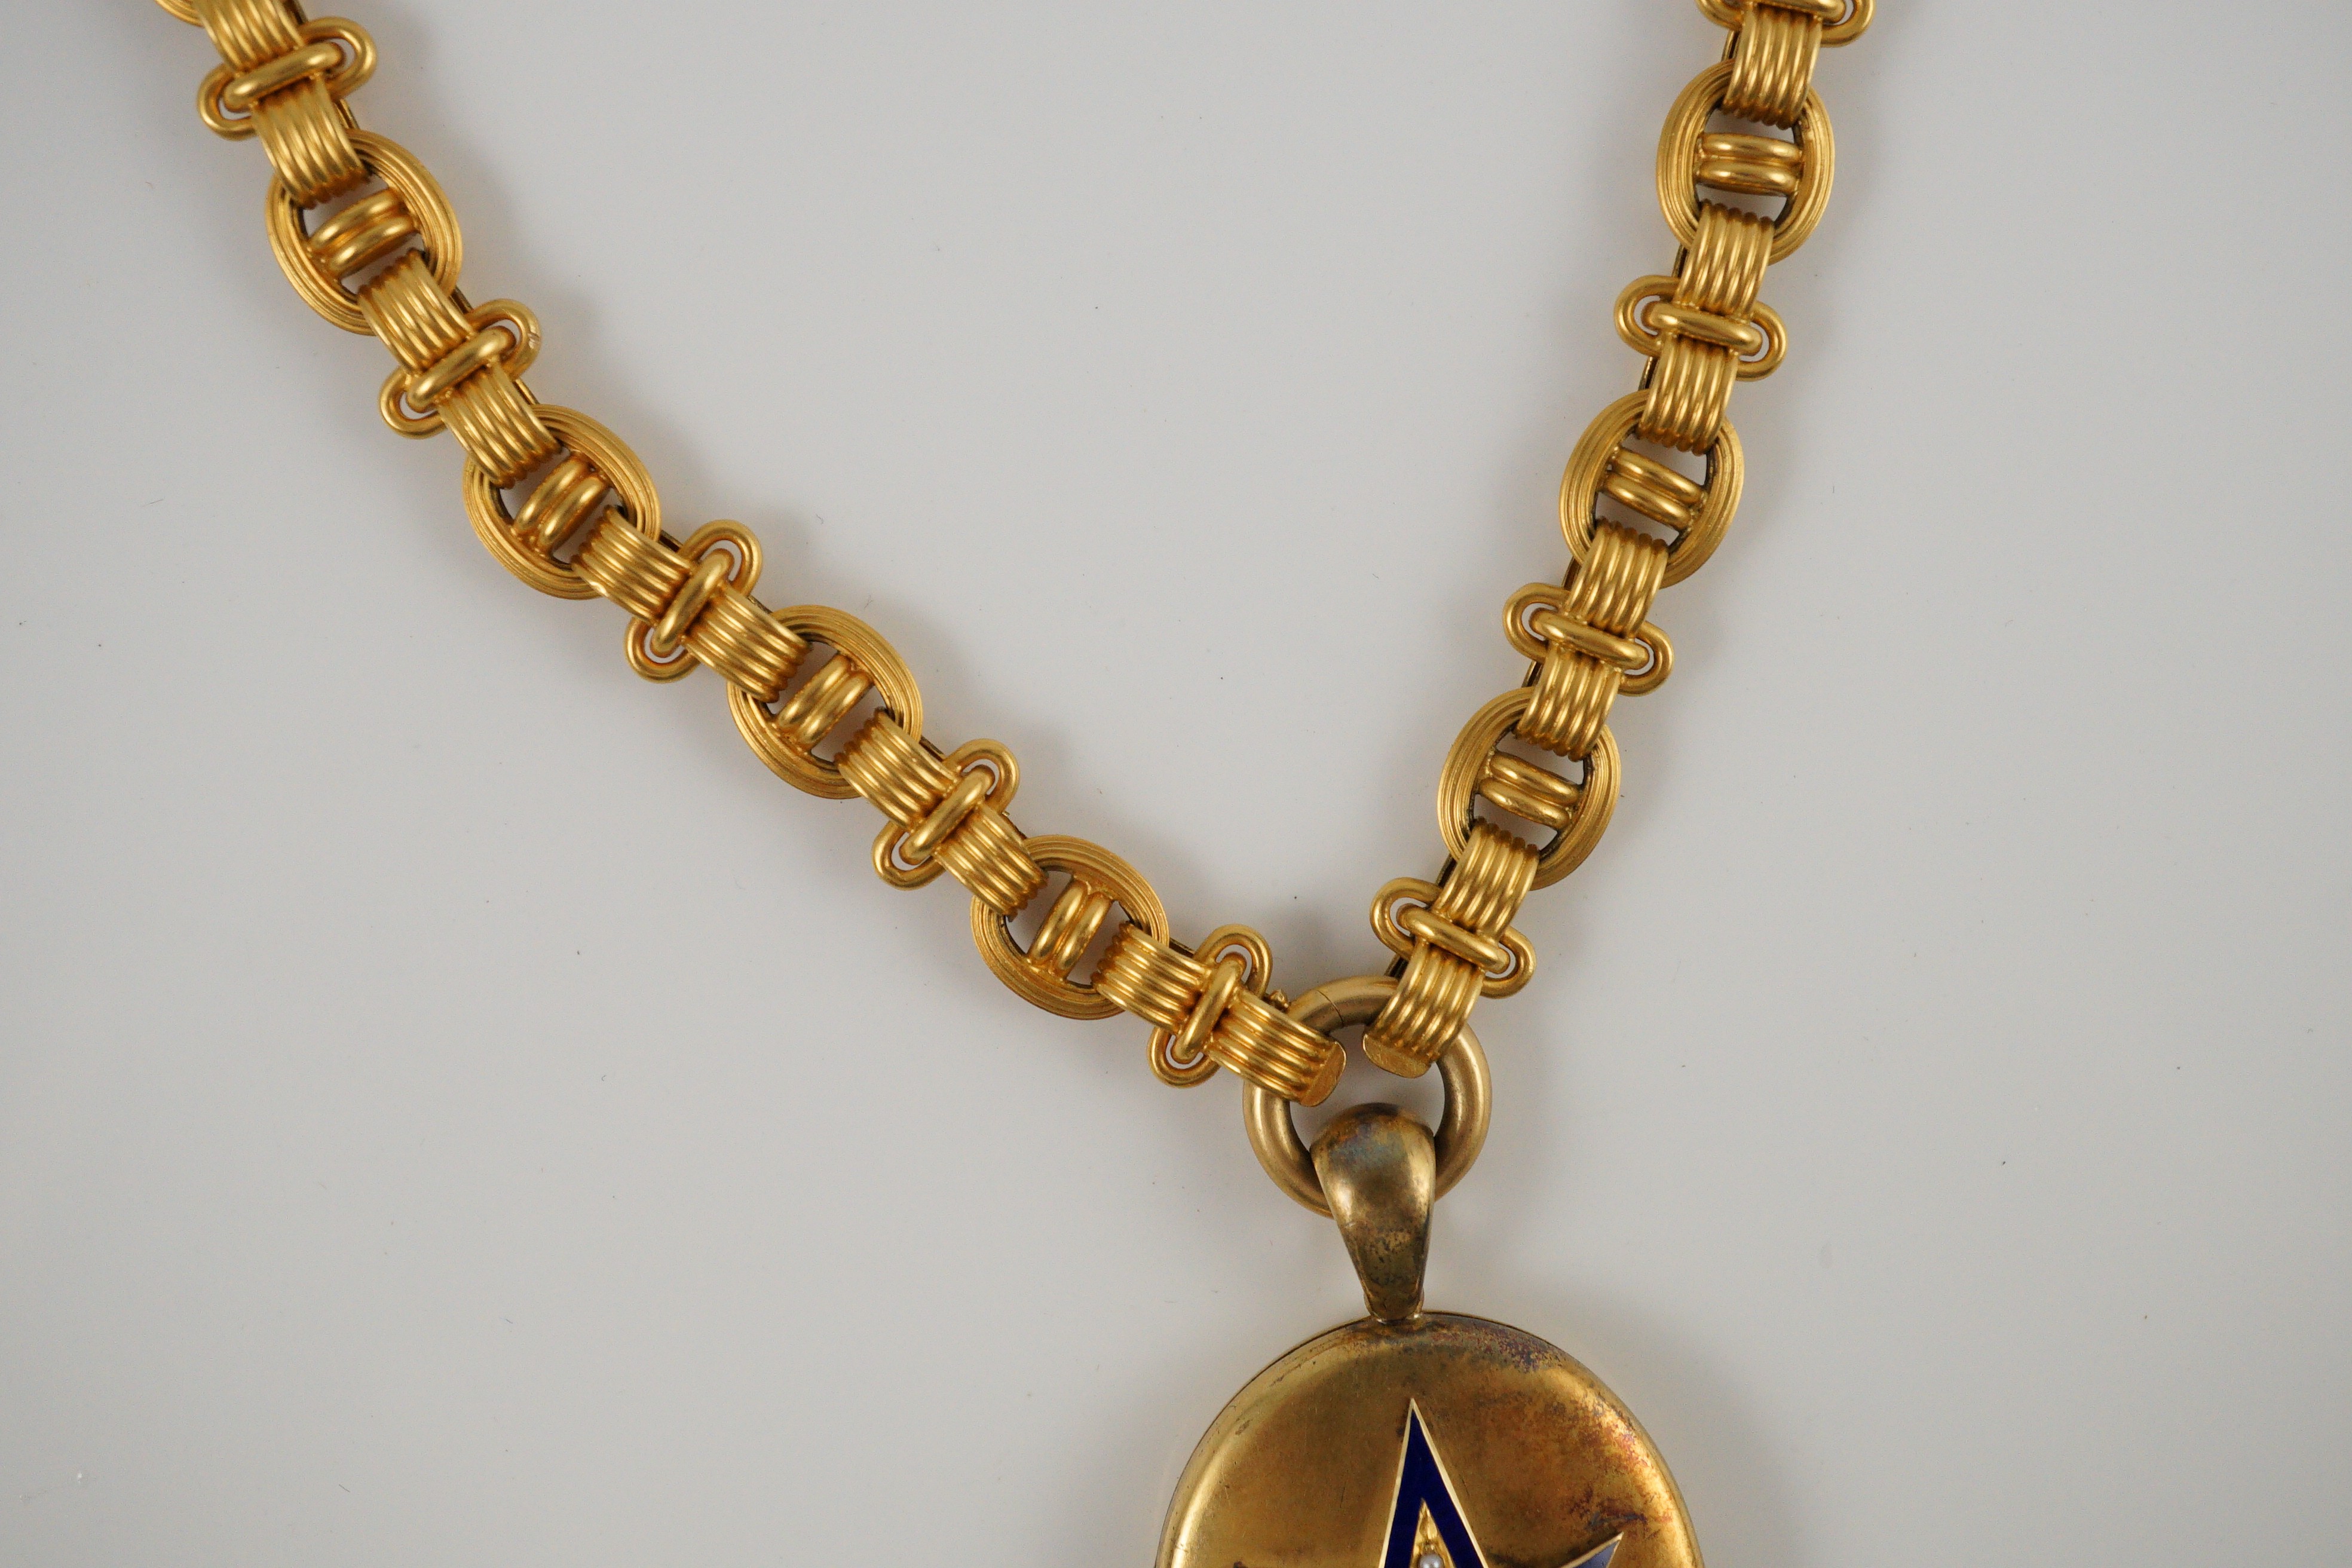 A Victorian gold, enamel and seed pearl set oval locket, on a 19th century Vienna 580/1000 gold chain